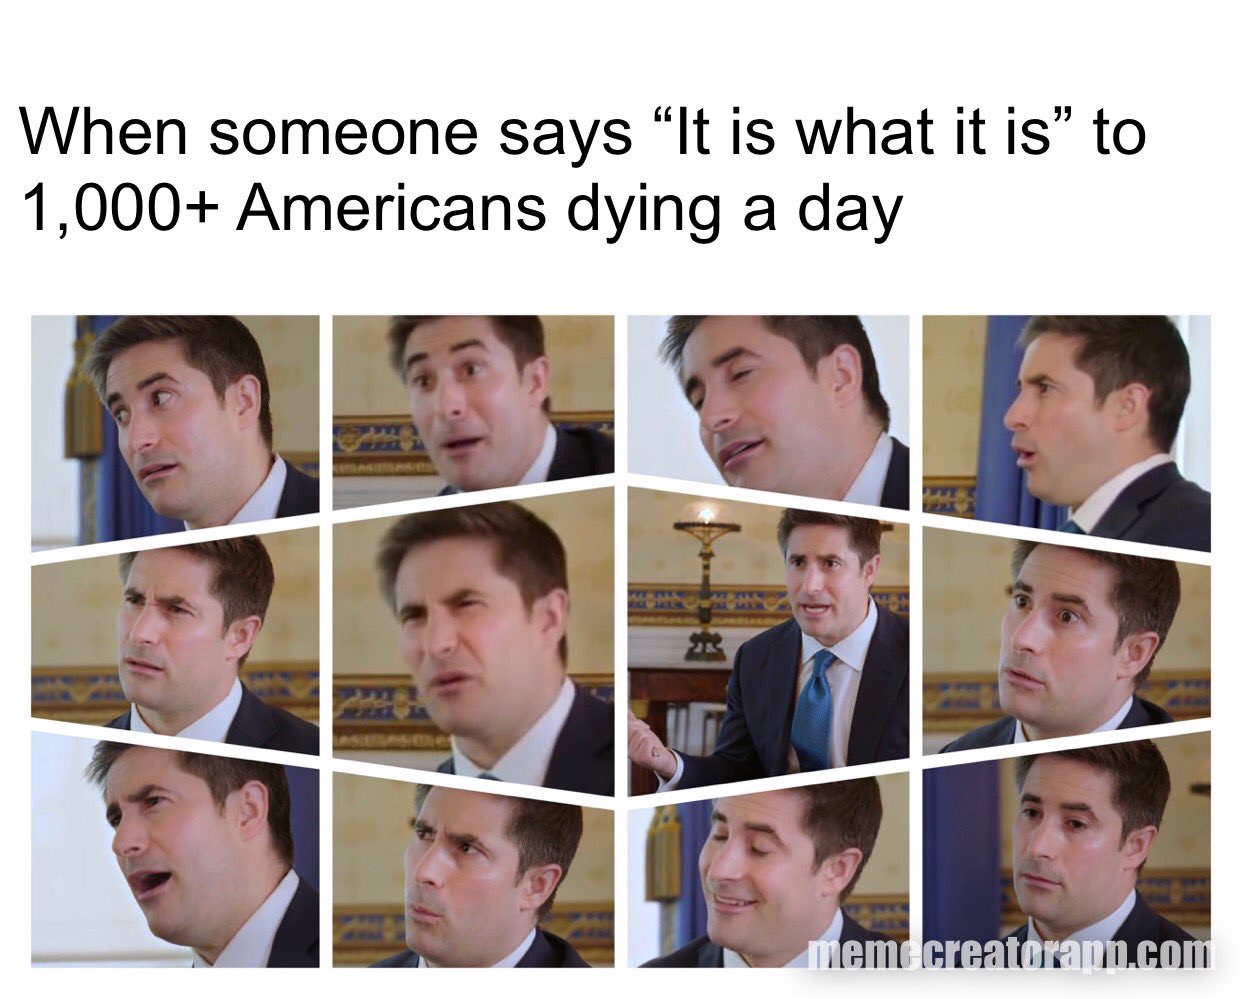 axios trump interview memes - facial expression - When someone says It is what it is" to 1,000 Americans dying a day meme creatorann.com